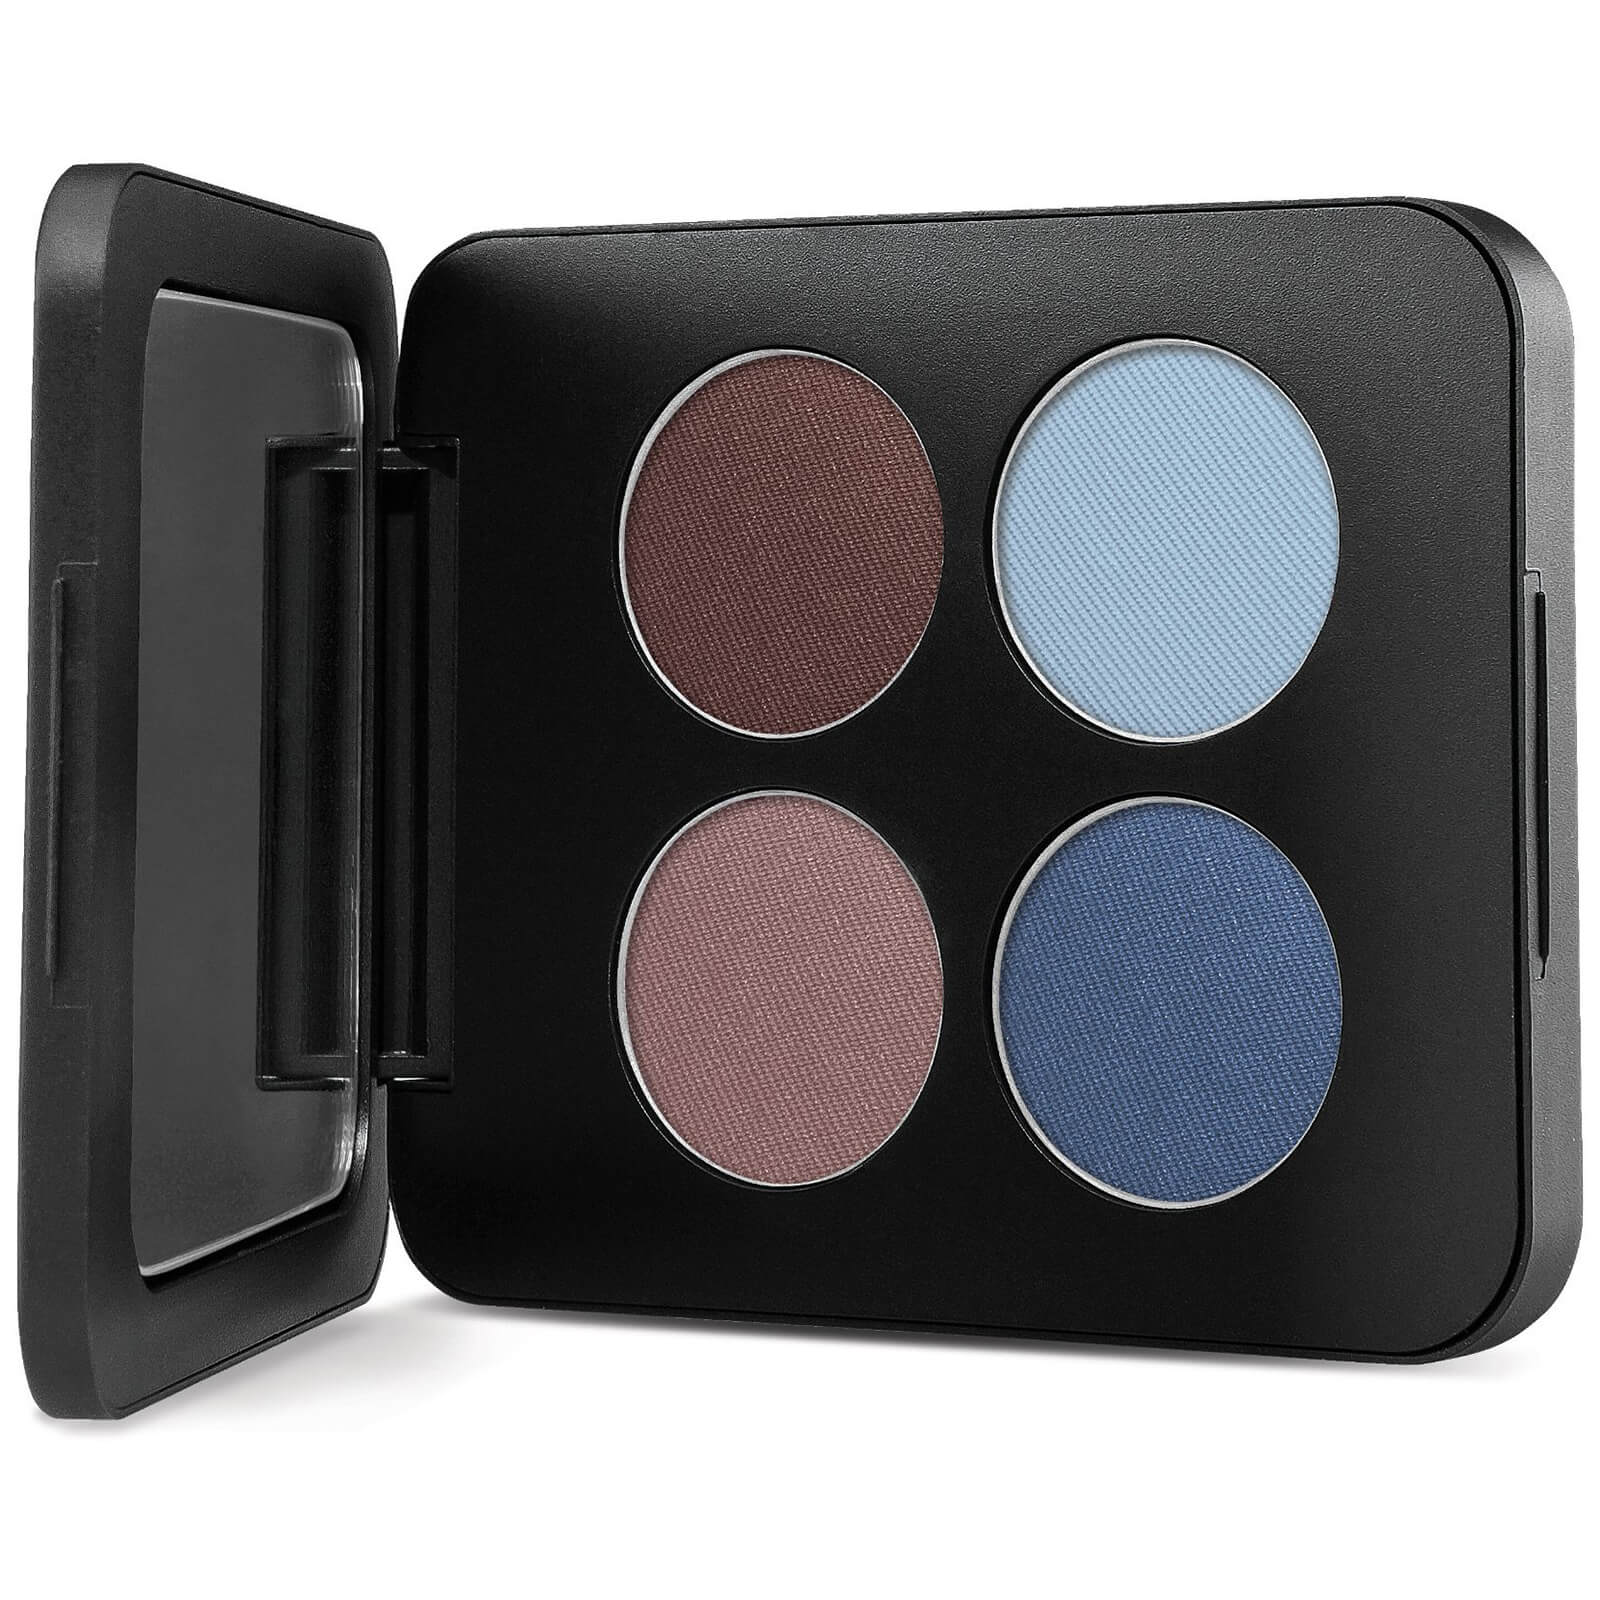 Youngblood Pressed Mineral Eyeshadow Quad 4g (Various Shades) - Glamour Eyes